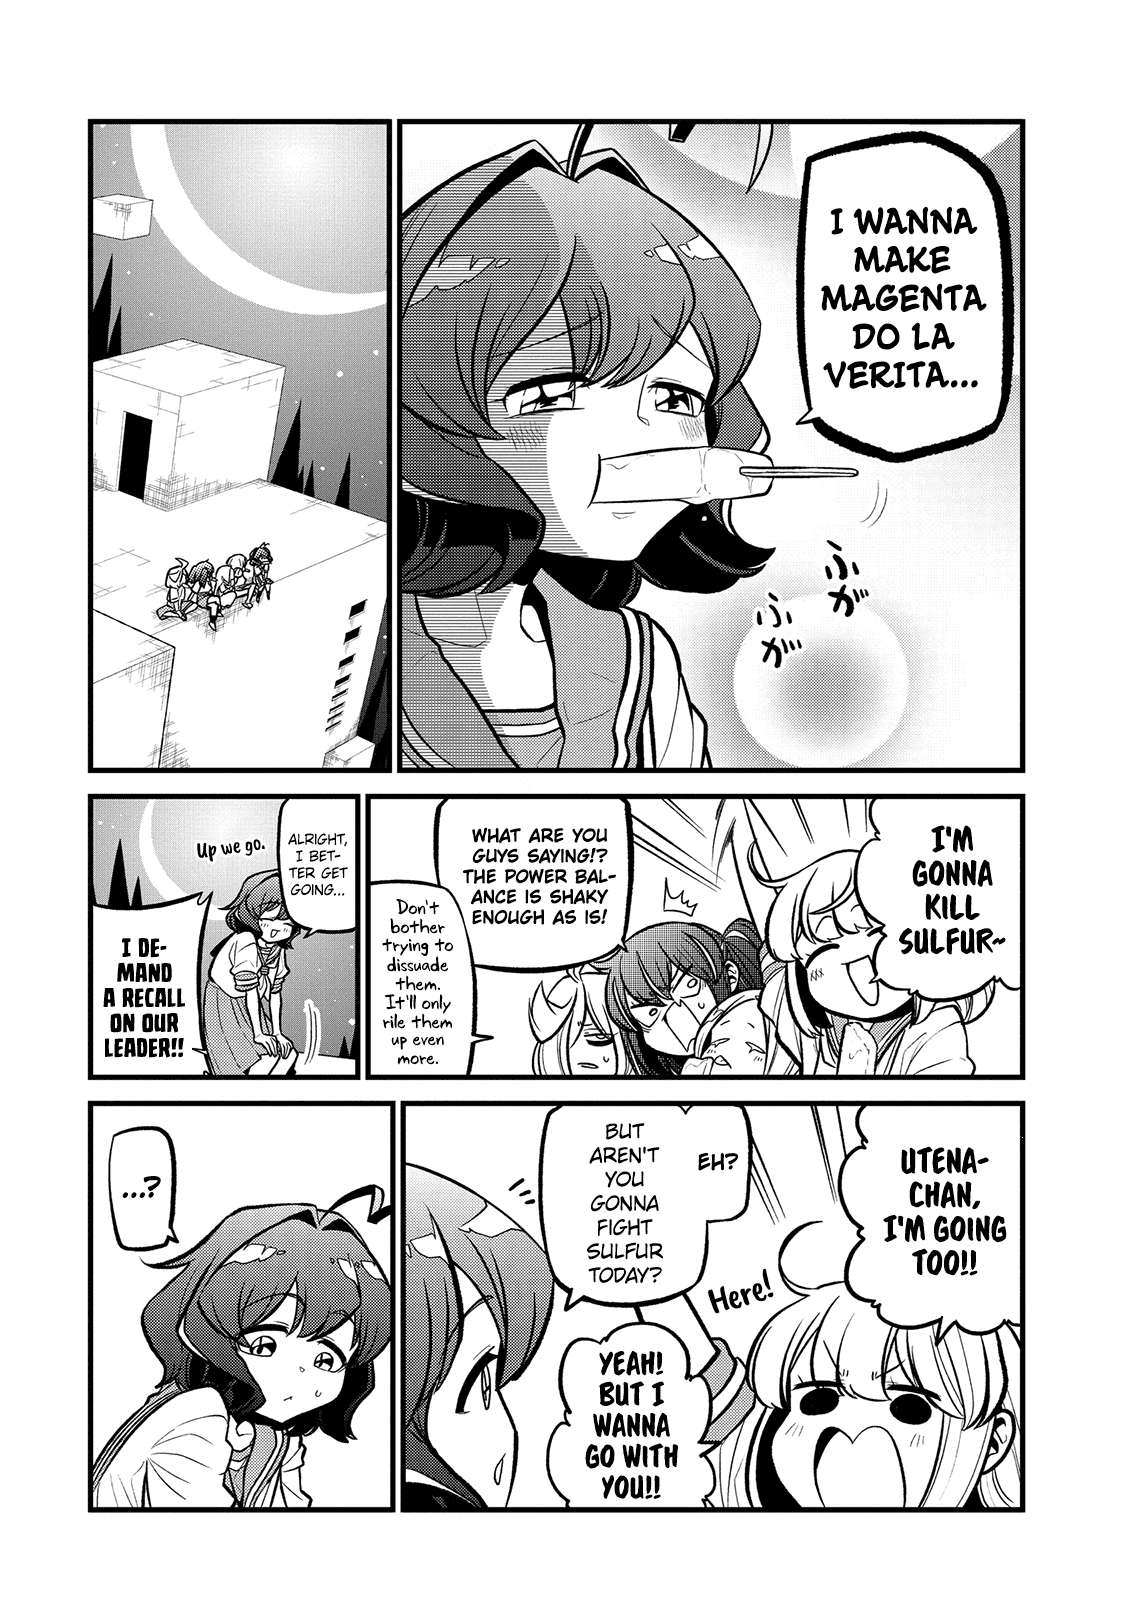 Gushing over Magical Girls - chapter 33 - #2